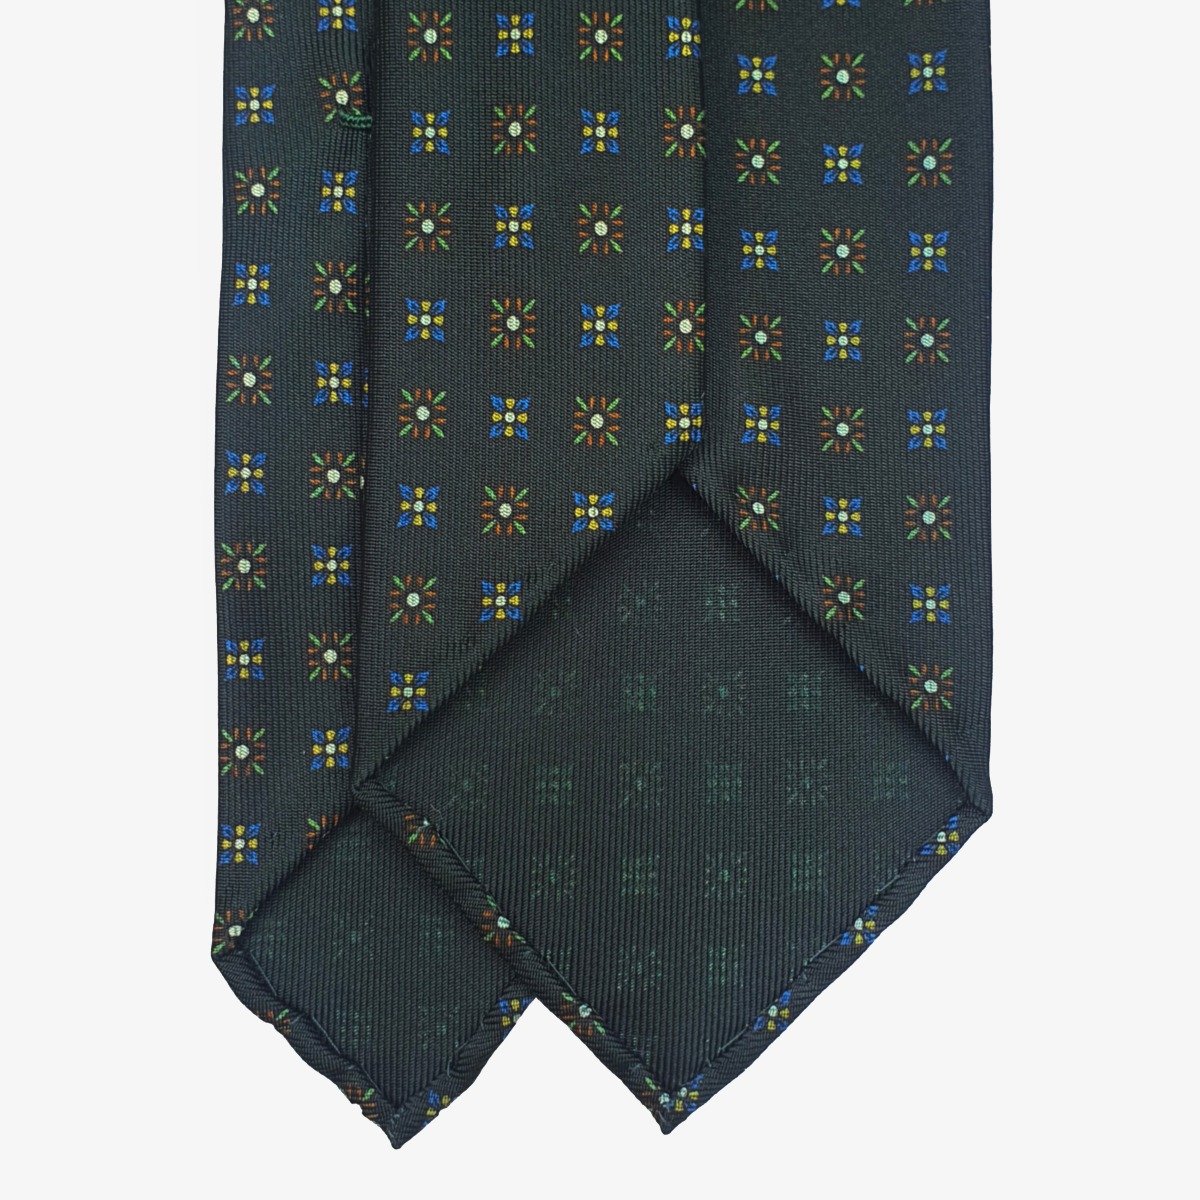 Shibumi Firenze madder green silk tie with yellow floral pattern